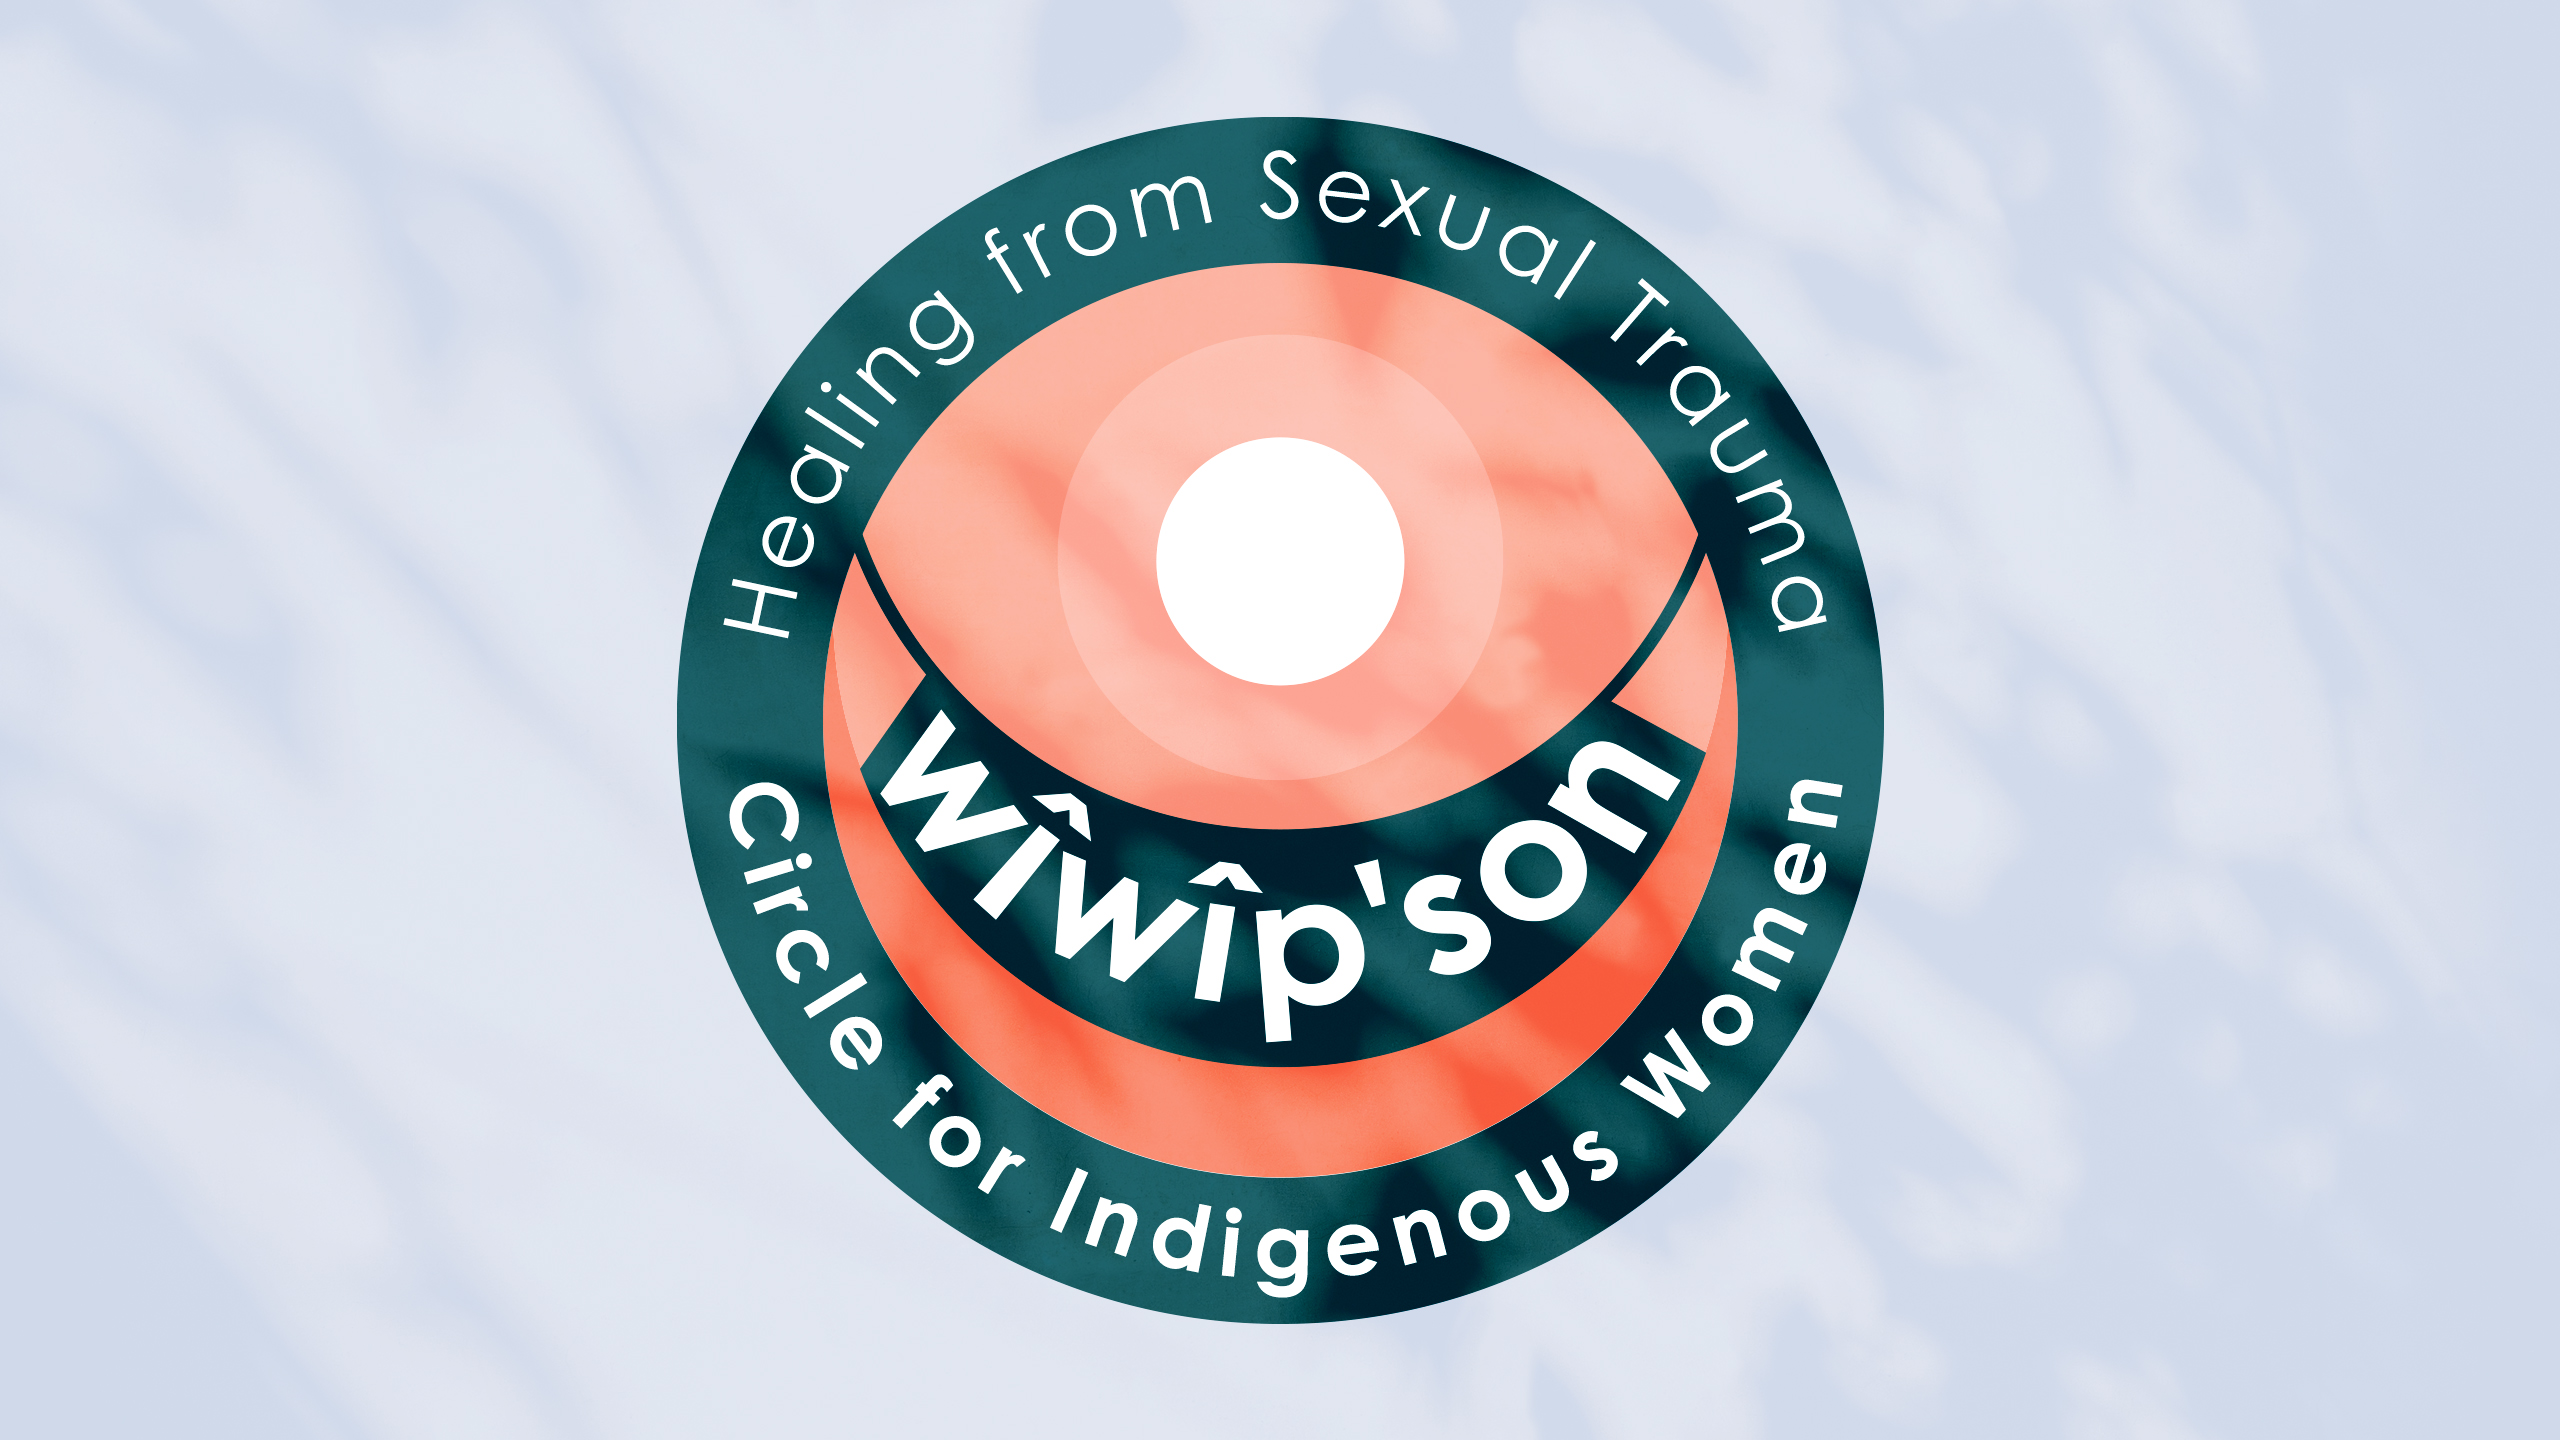 Teal and coral graphic that says "Wîwîp'son Healing from Sexual Trauma Circle for Indigenous Women", arranged into the shape of an Indigenous baby swing